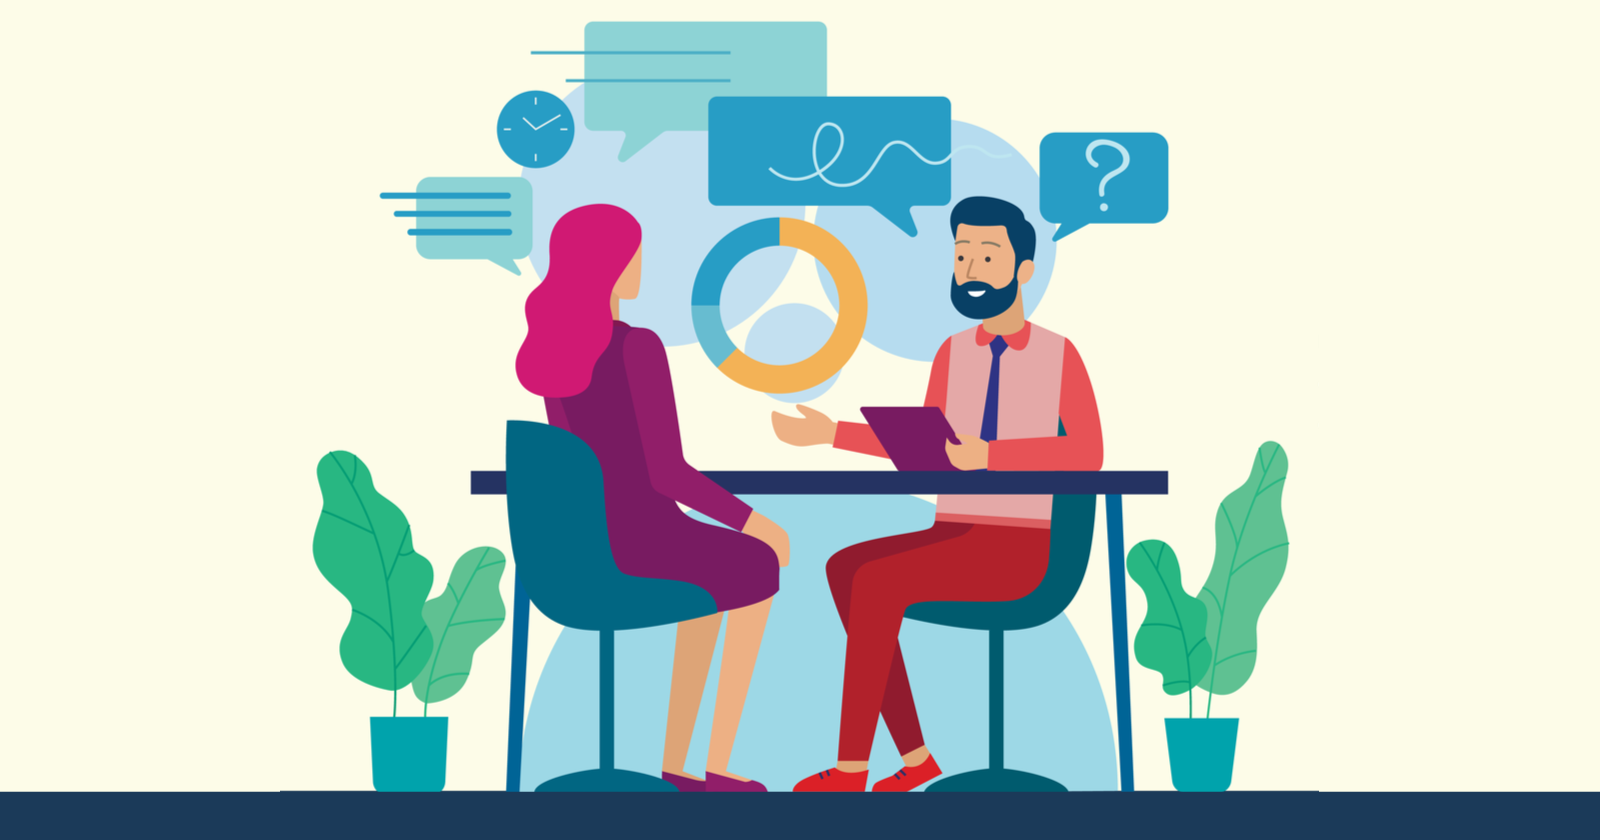 Hiring a PPC Manager can be challenging. Dig deeper and go beyond tactical knowledge with these interview questions that can help you assess candidates.